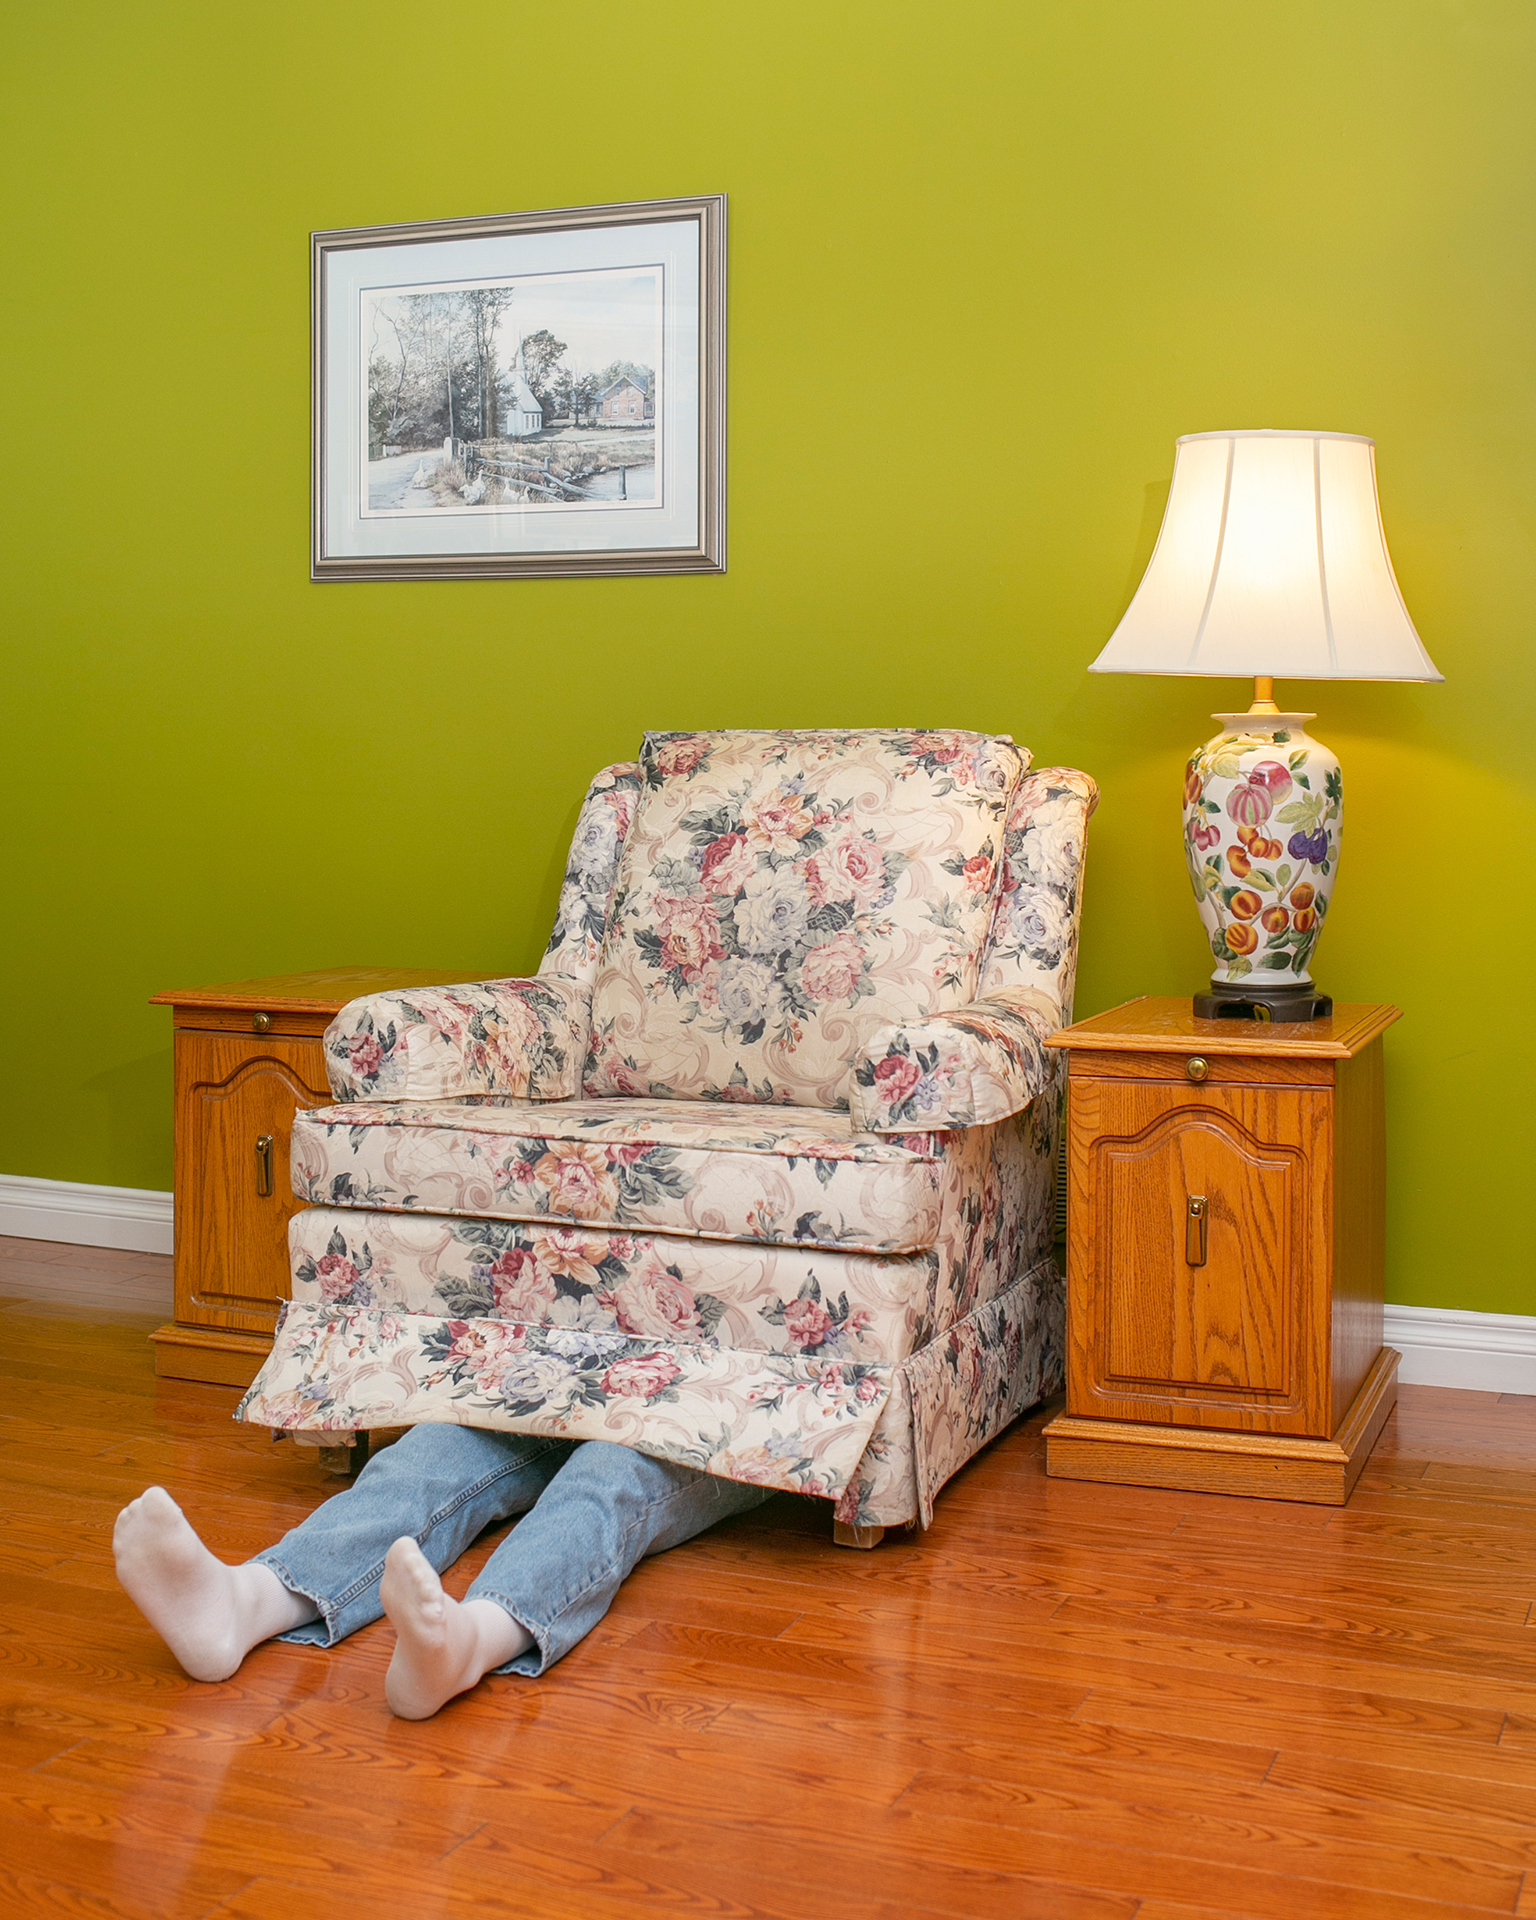 An empty white floral armchair placed against a green wall. There is a photo on hanging on the wall above the chair. Two small wooden side tables sit next to the chair with a lamp on one of the side tables. A set of legs wearing blue jeans and white socks are sticking out from under the armchair on the floor in a relaxed manner.